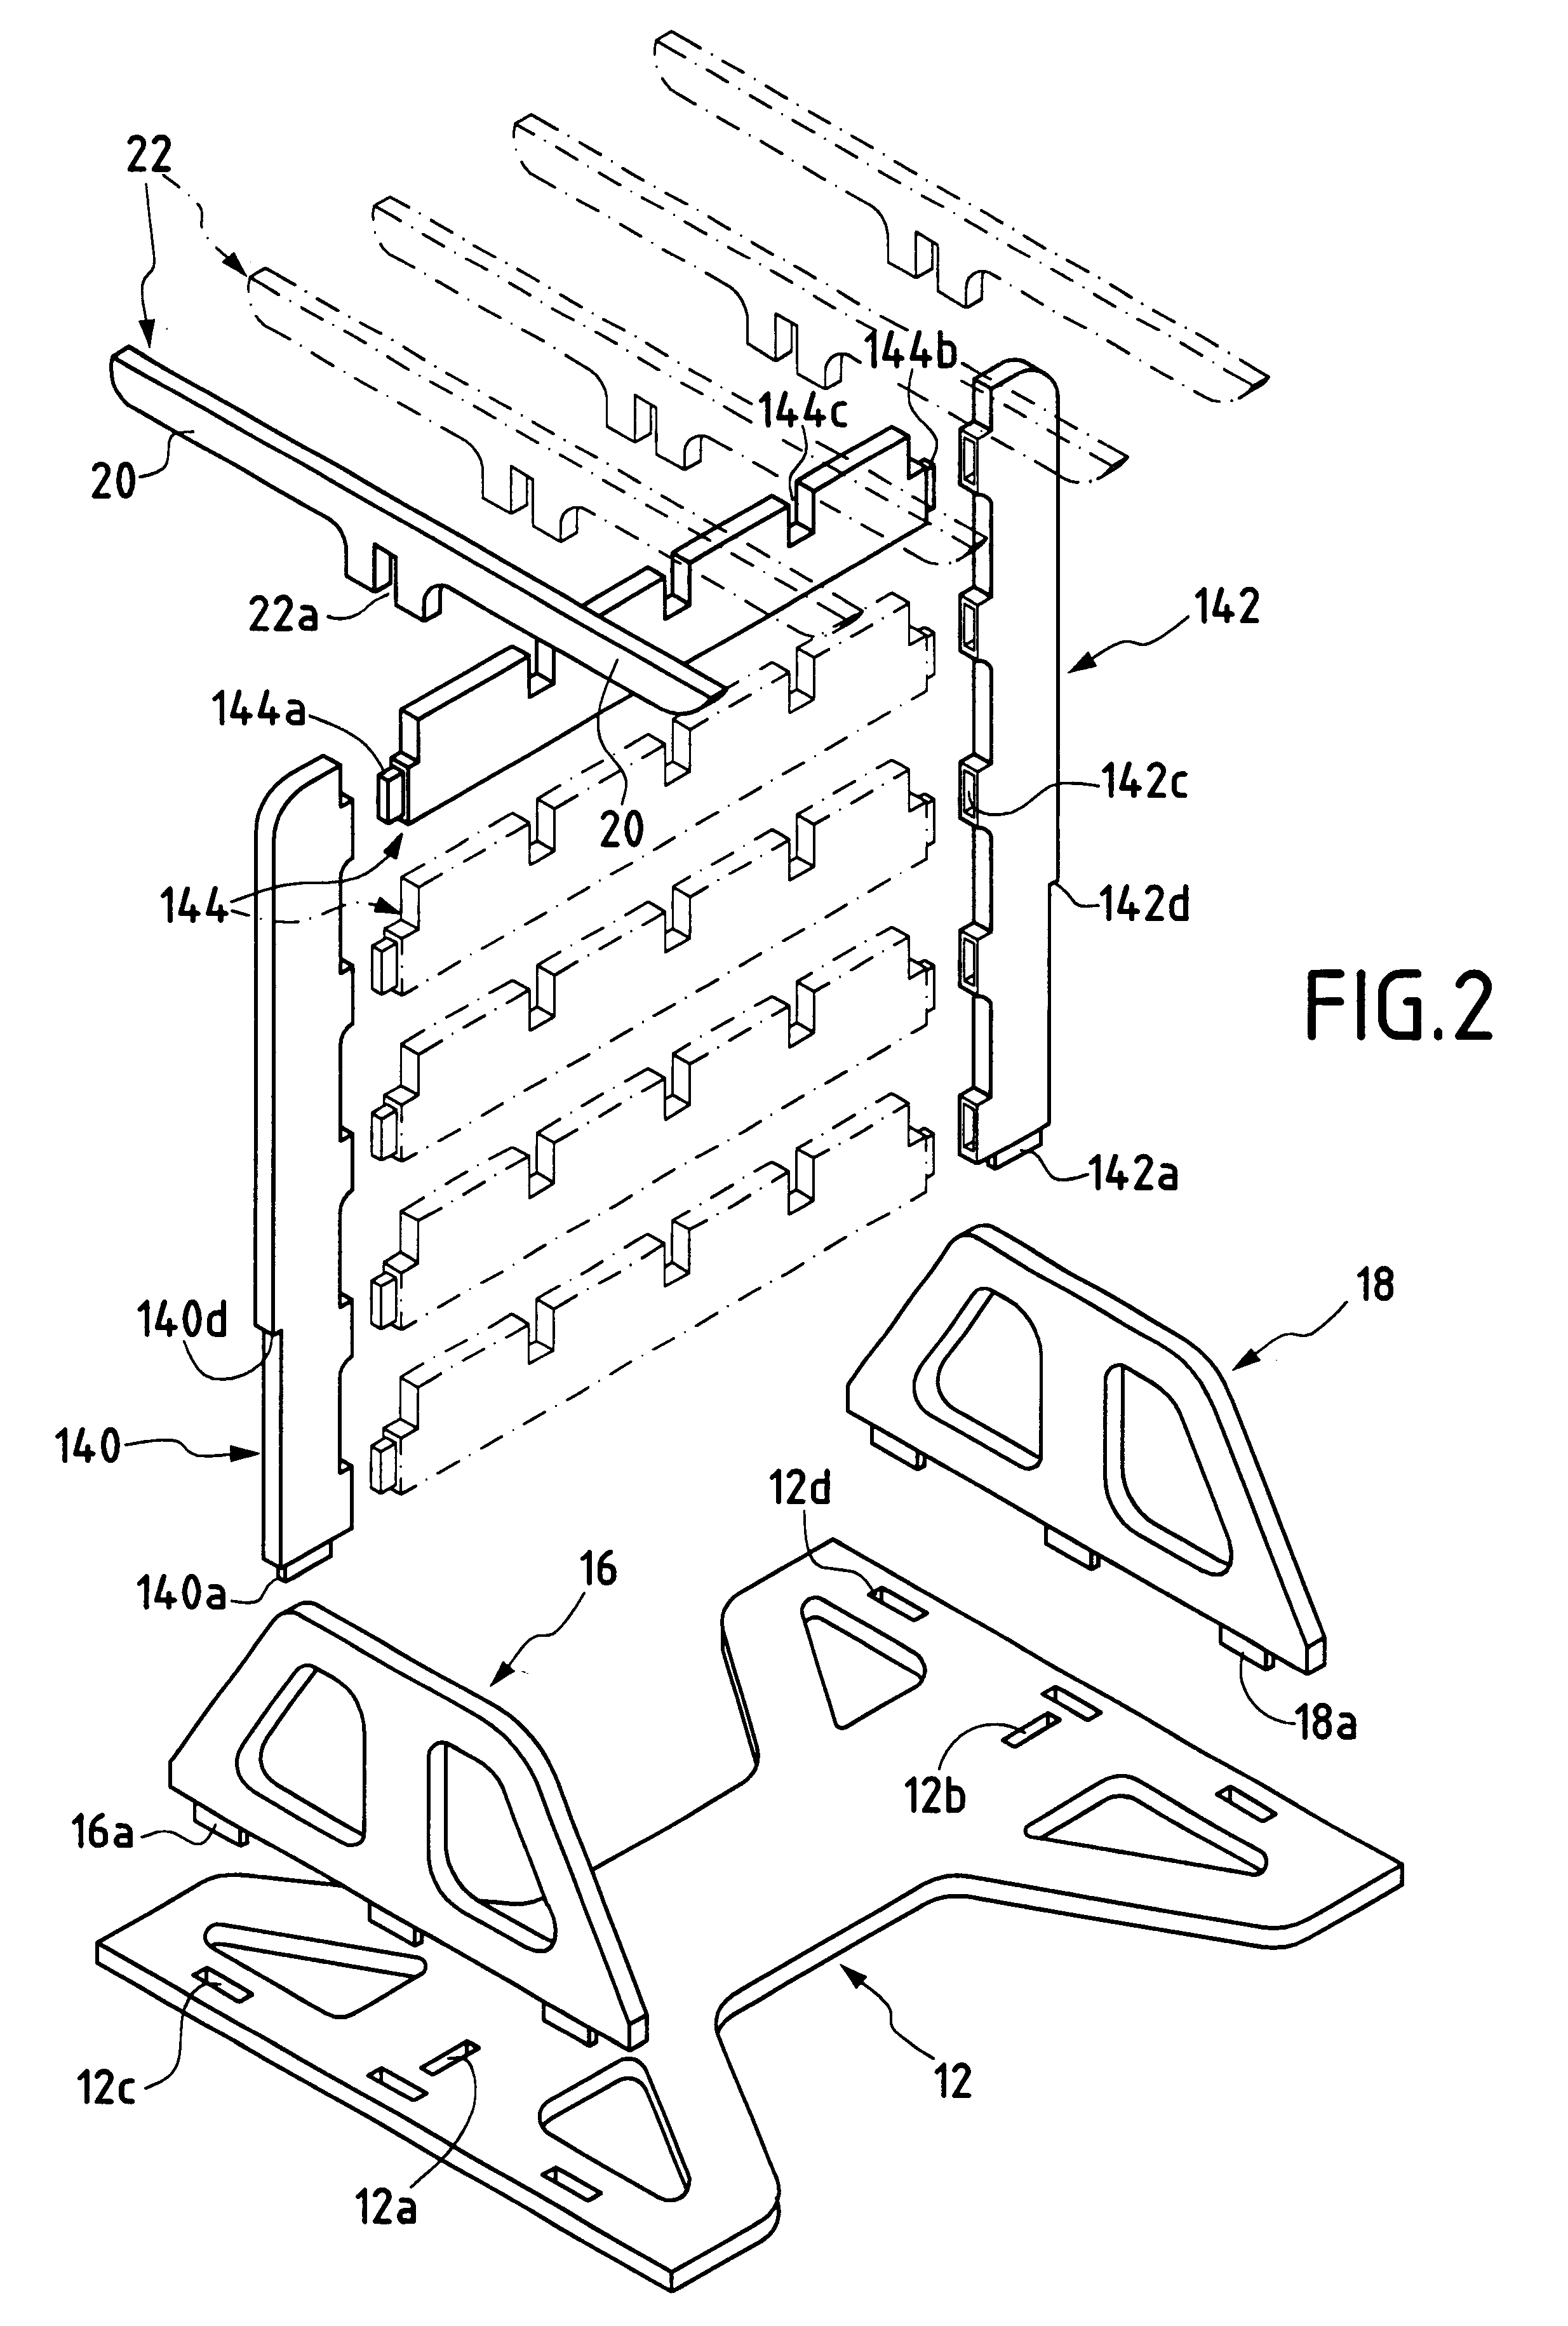 Rack for loading parts for heat treatment